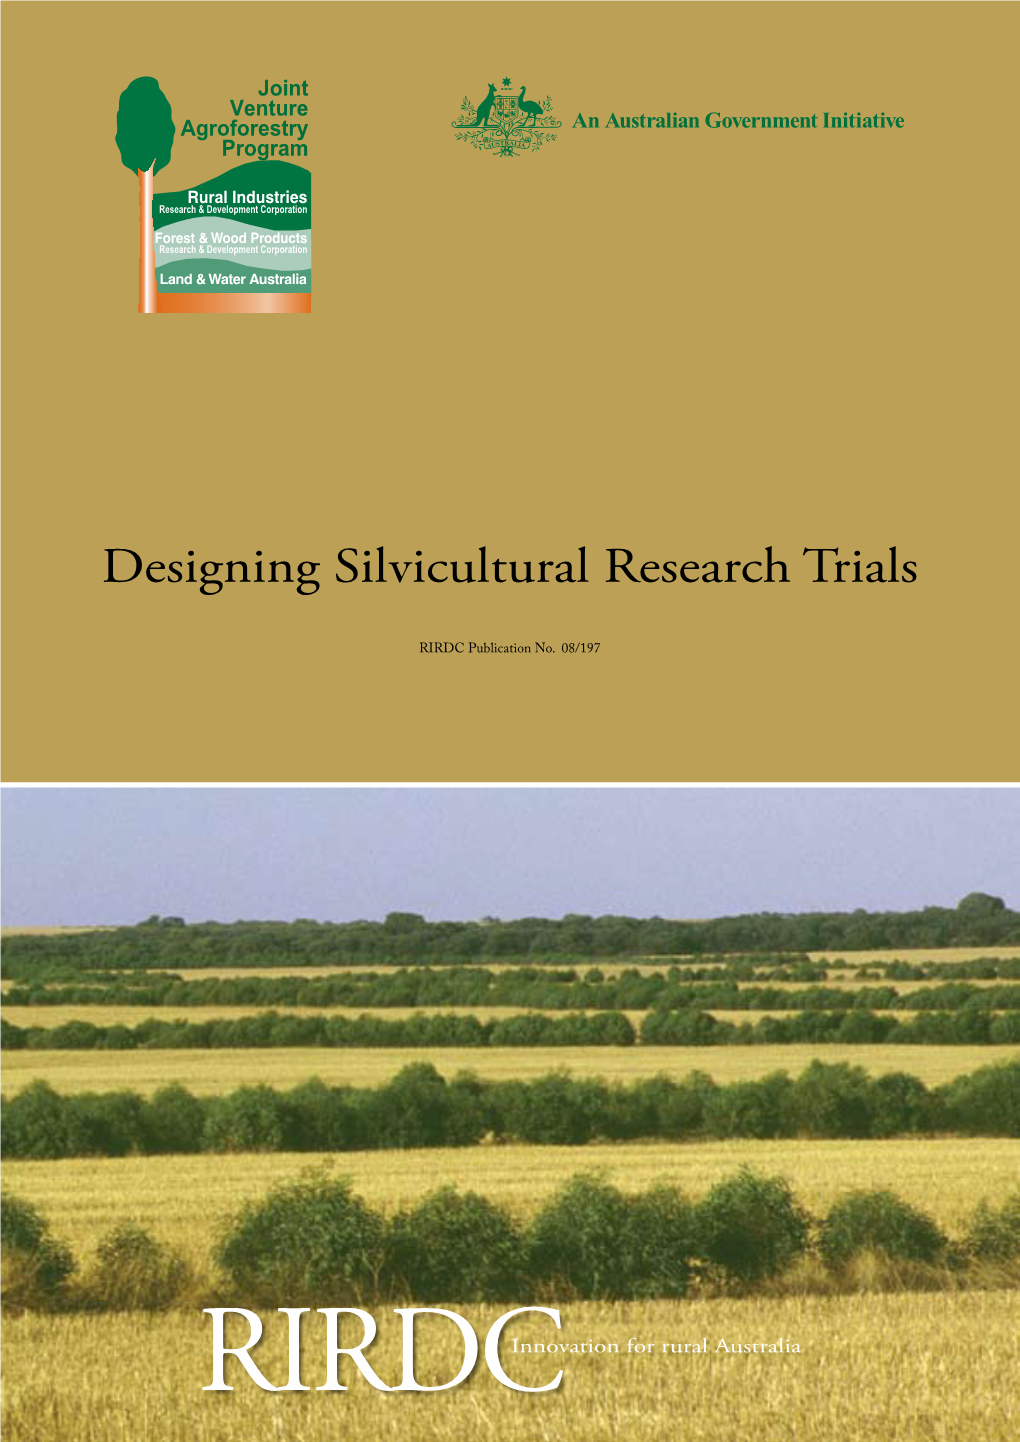 Designing Silvicultural Research Trials